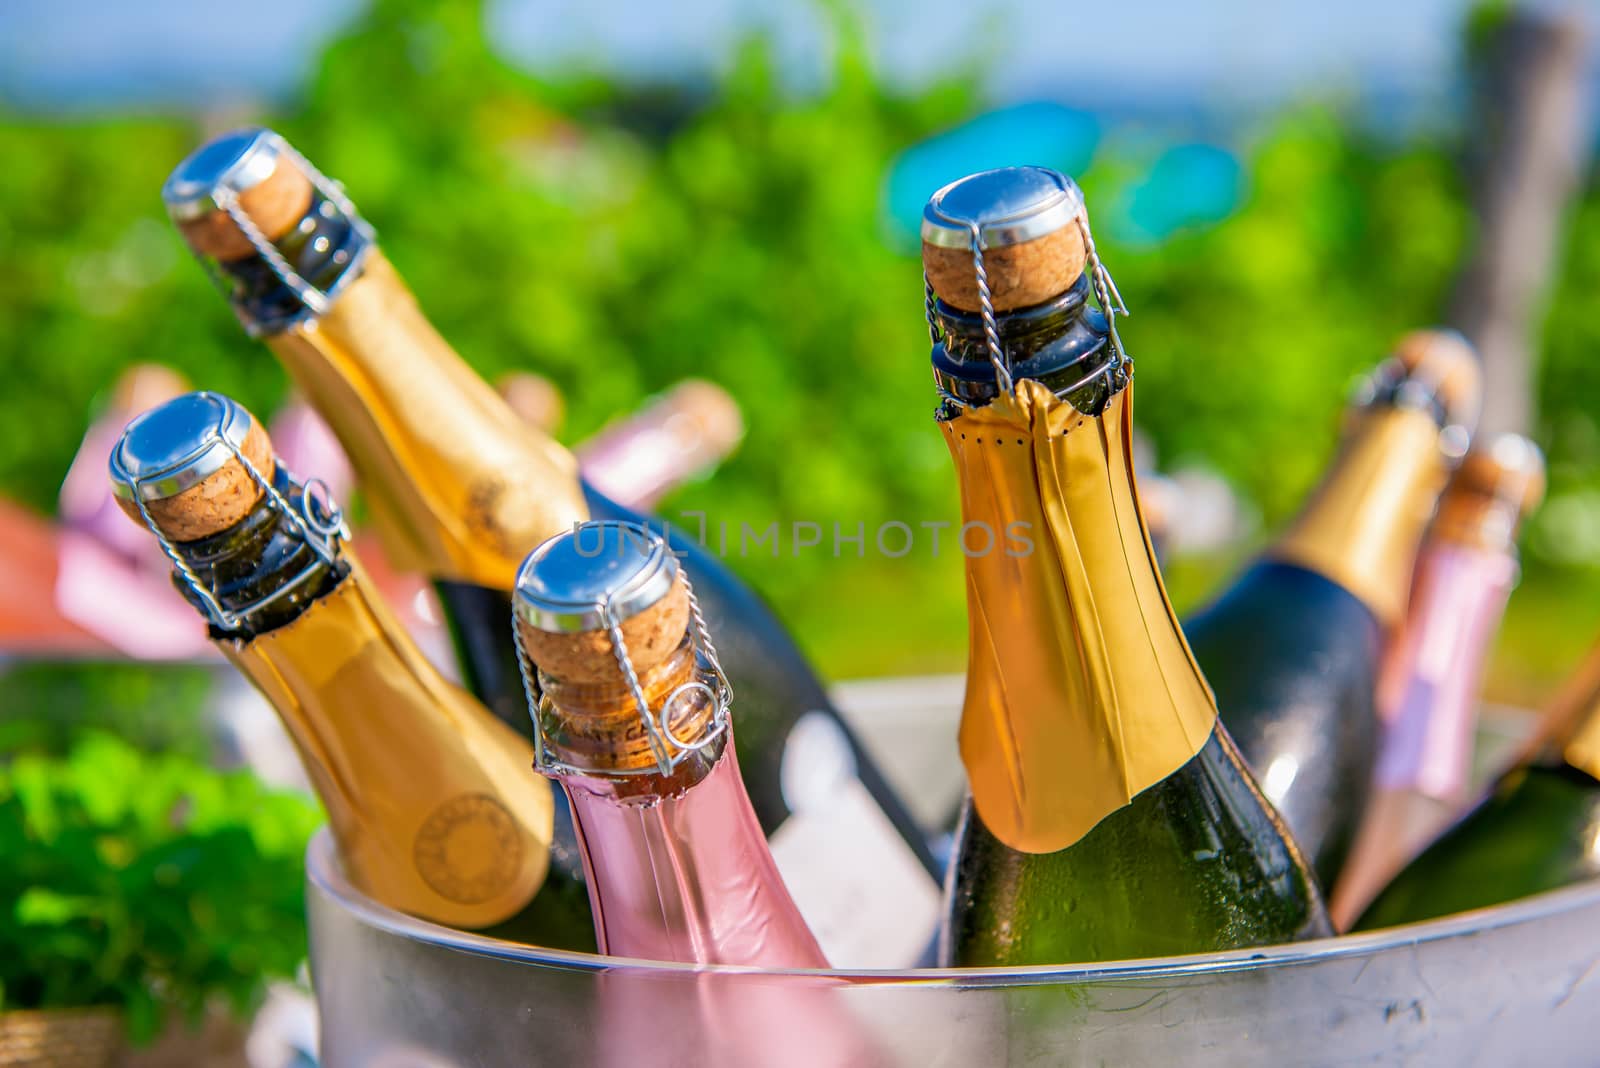 Bottles of champagne, sparkling wine in cooler by asafaric